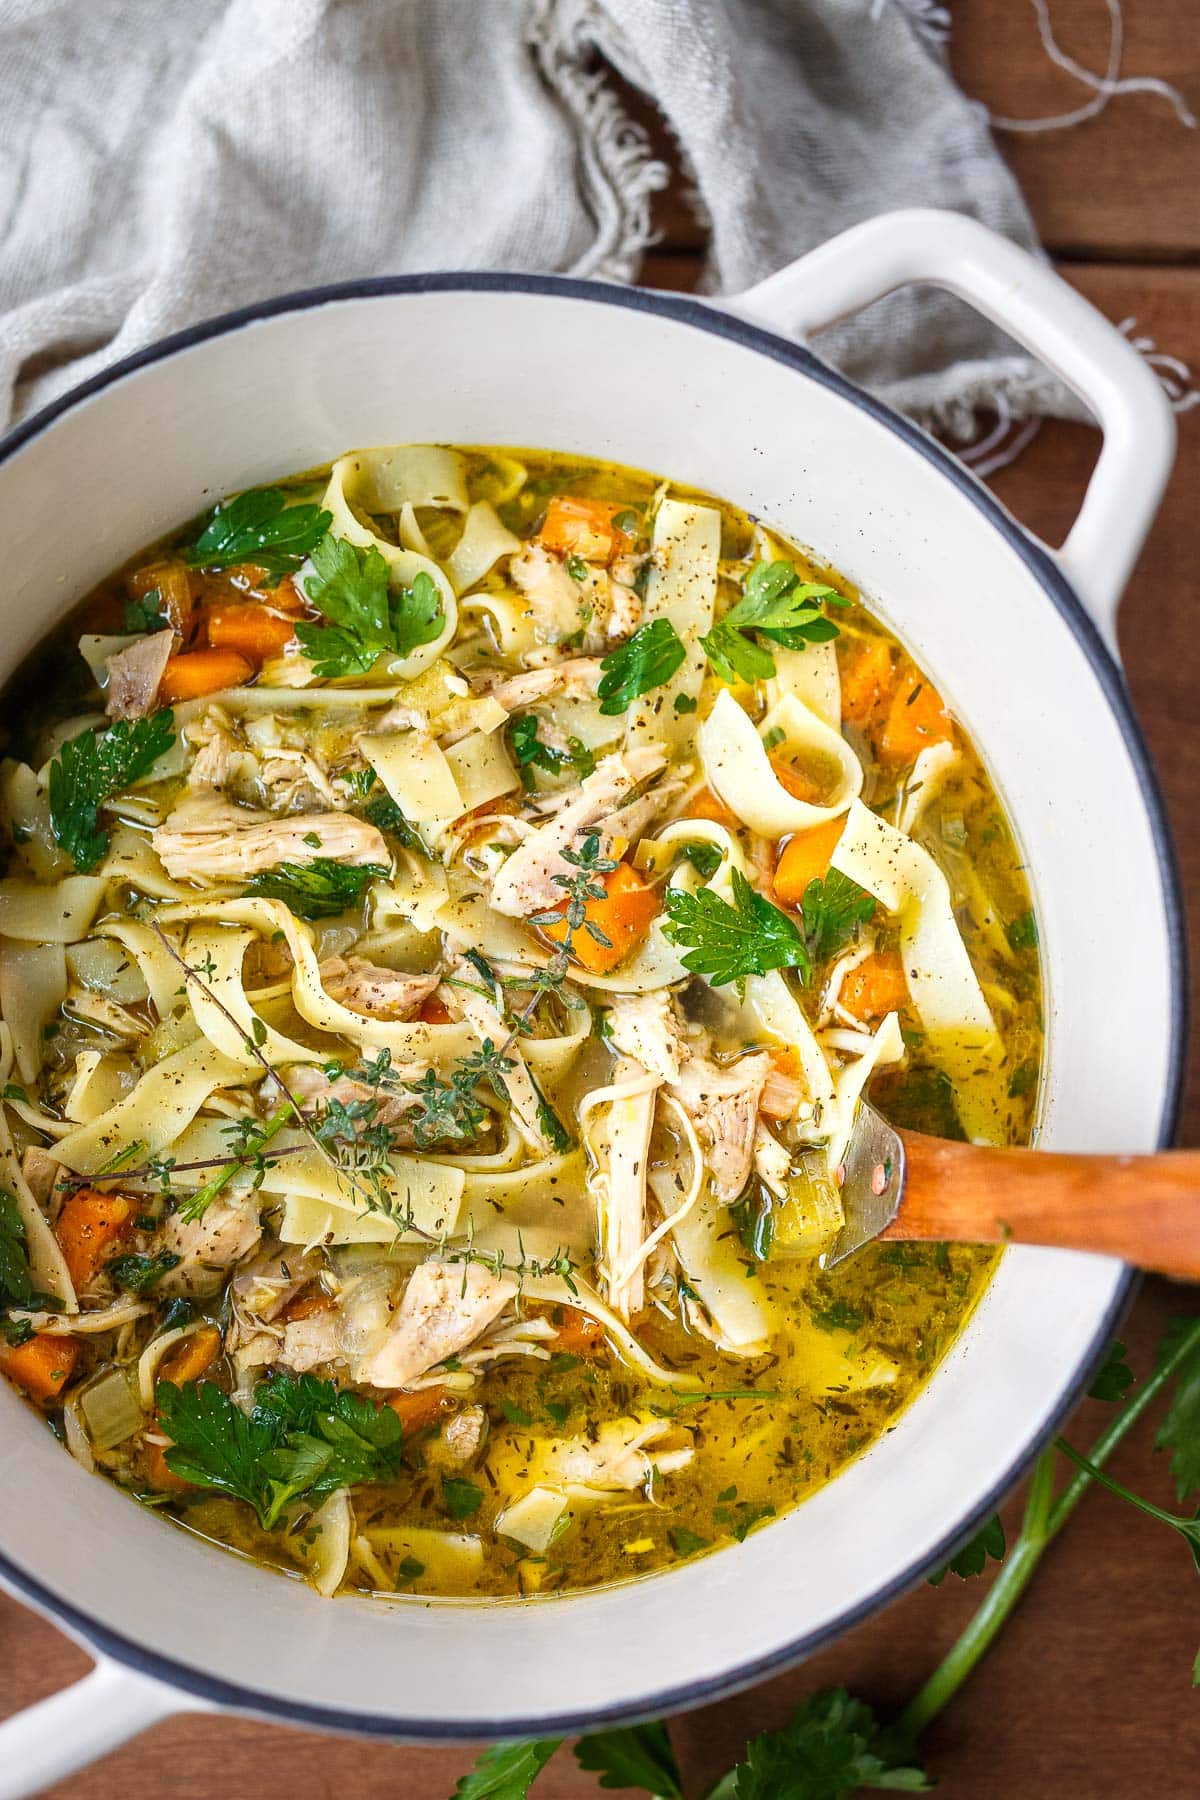 Homemade Chicken Noodle Soup is easy to make and the ultimate comfort food full of immune boosting properties. Healthy, satisfying and comes together in less than an hour!